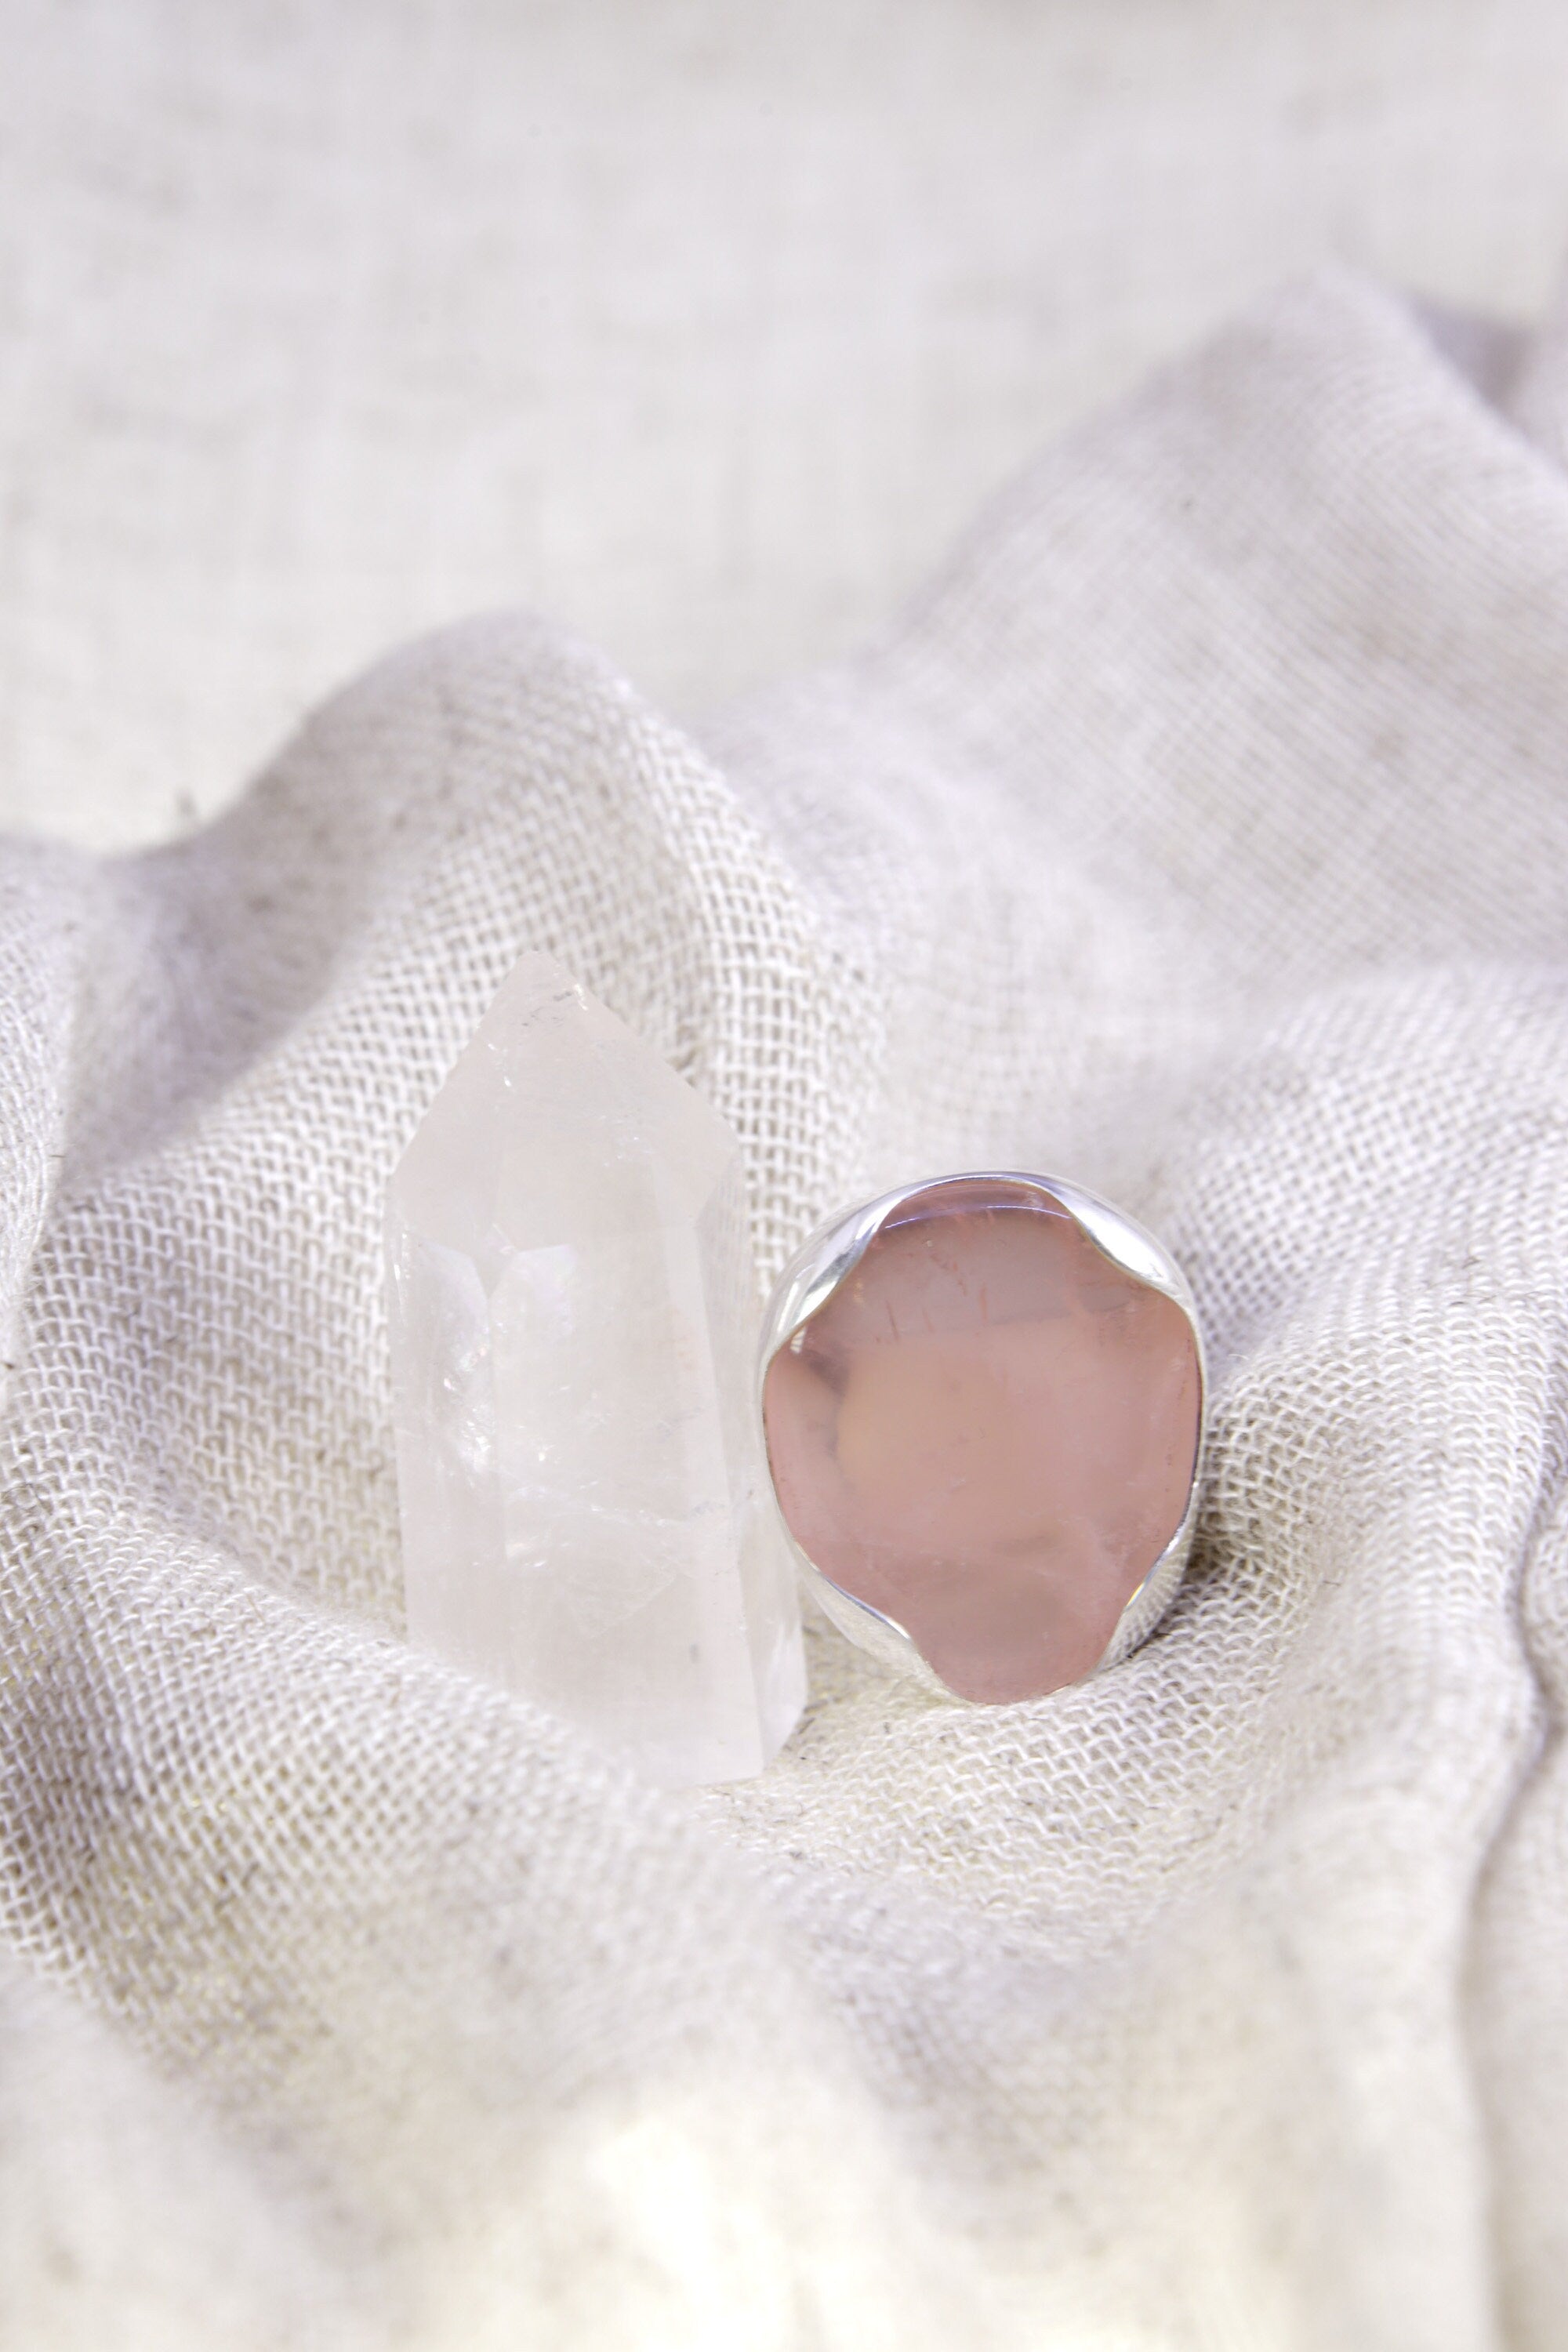 The Sturdy Haven of Gentle Affection: Adjustable Sterling Silver Ring with Oval Rose Quartz - Unisex - Size 5-12 US